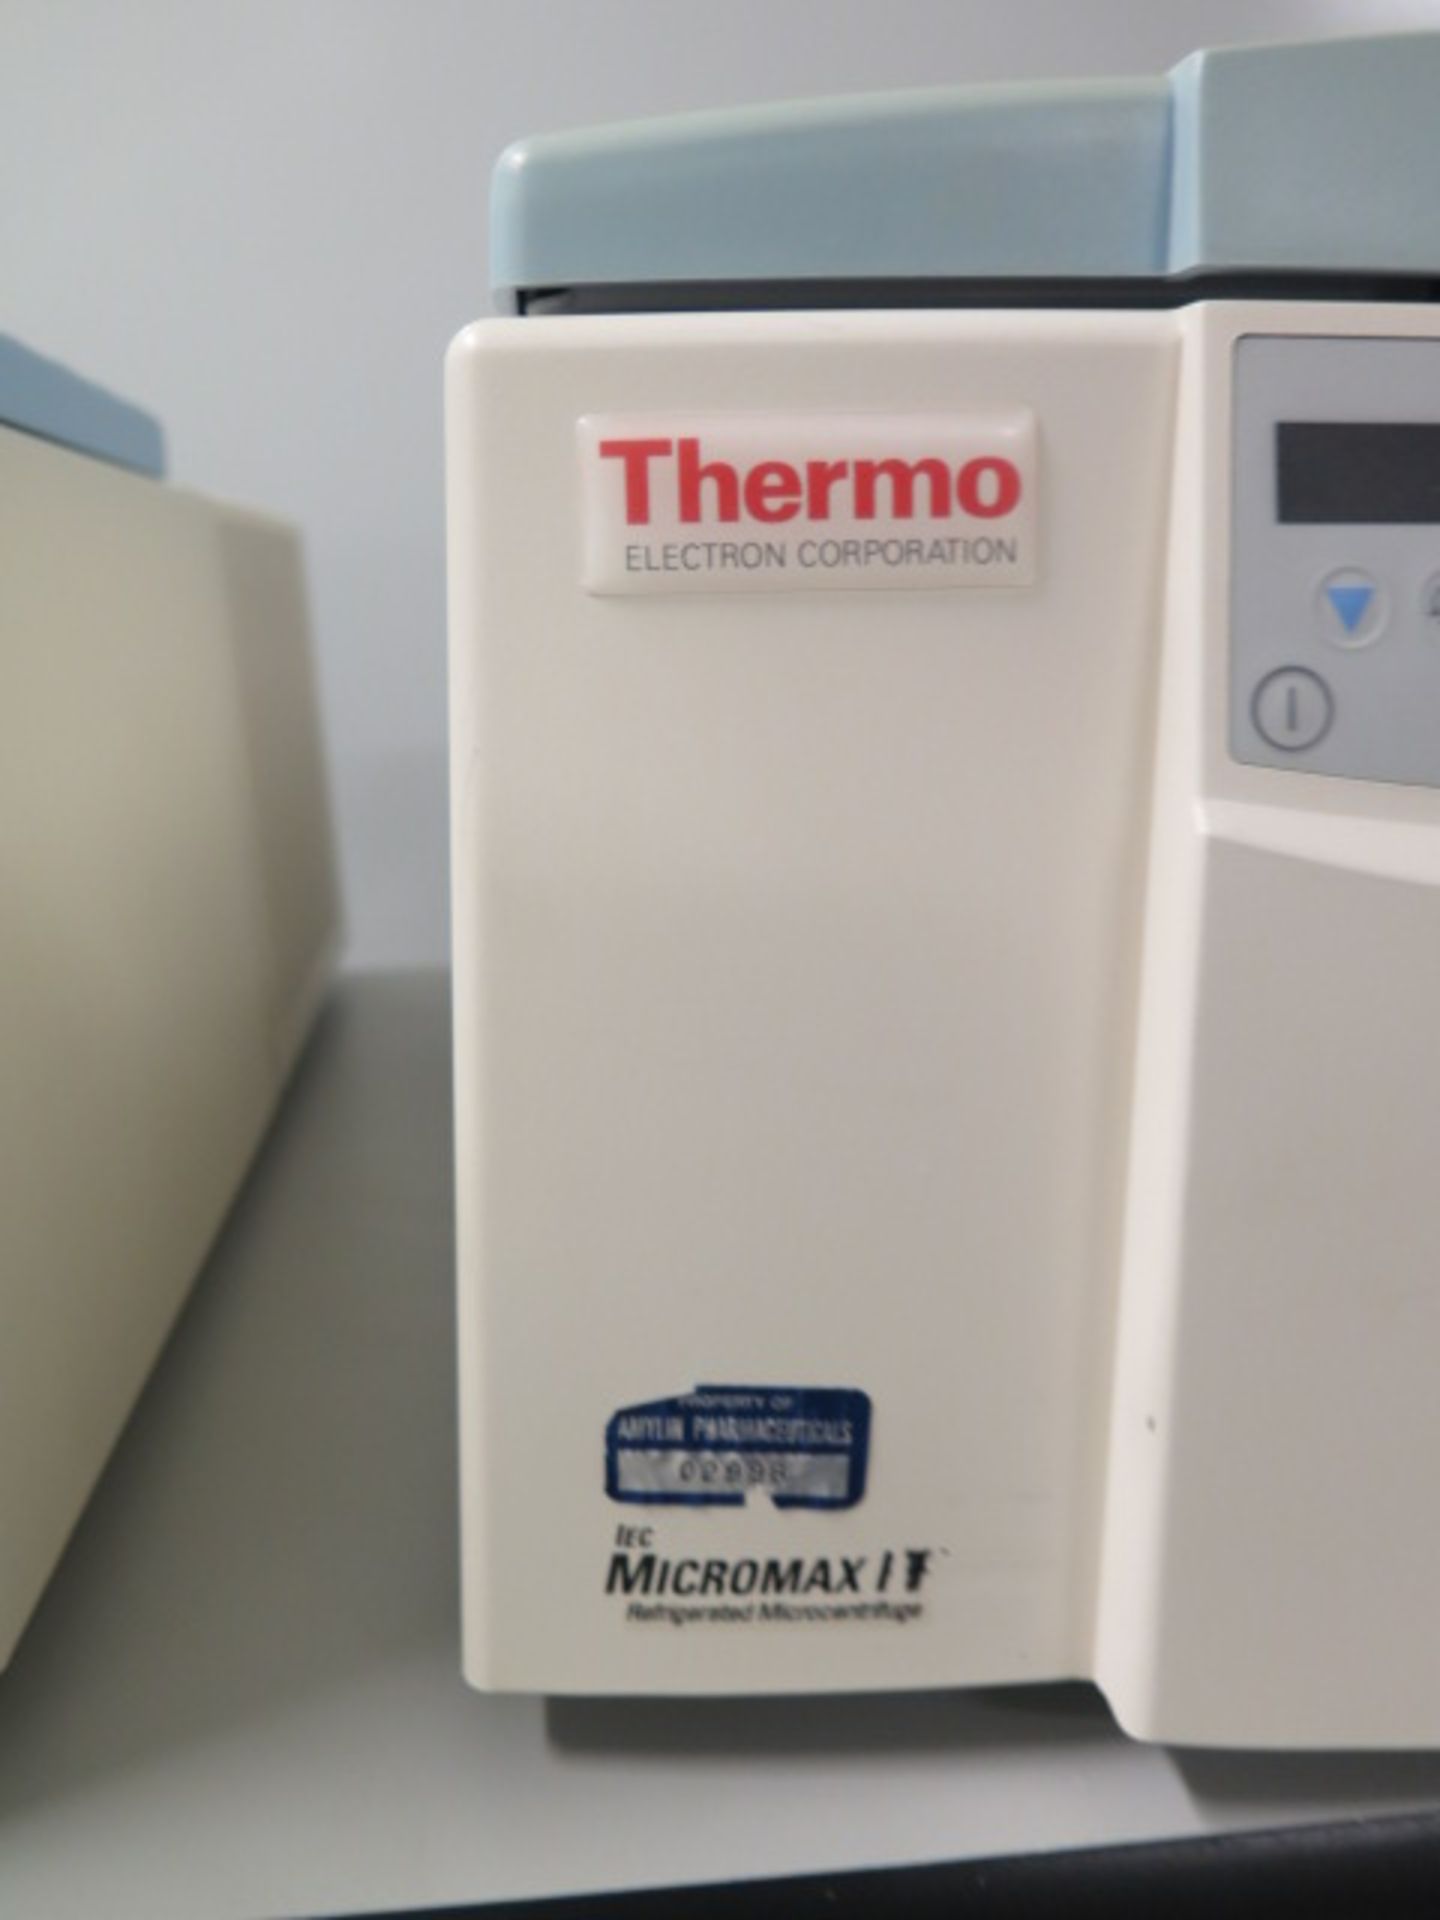 Thermo Electron "Micromax RF" mdl. 120 Refrigerated Microcentrifuge s/n 3592F2027 | Loading - Image 4 of 5